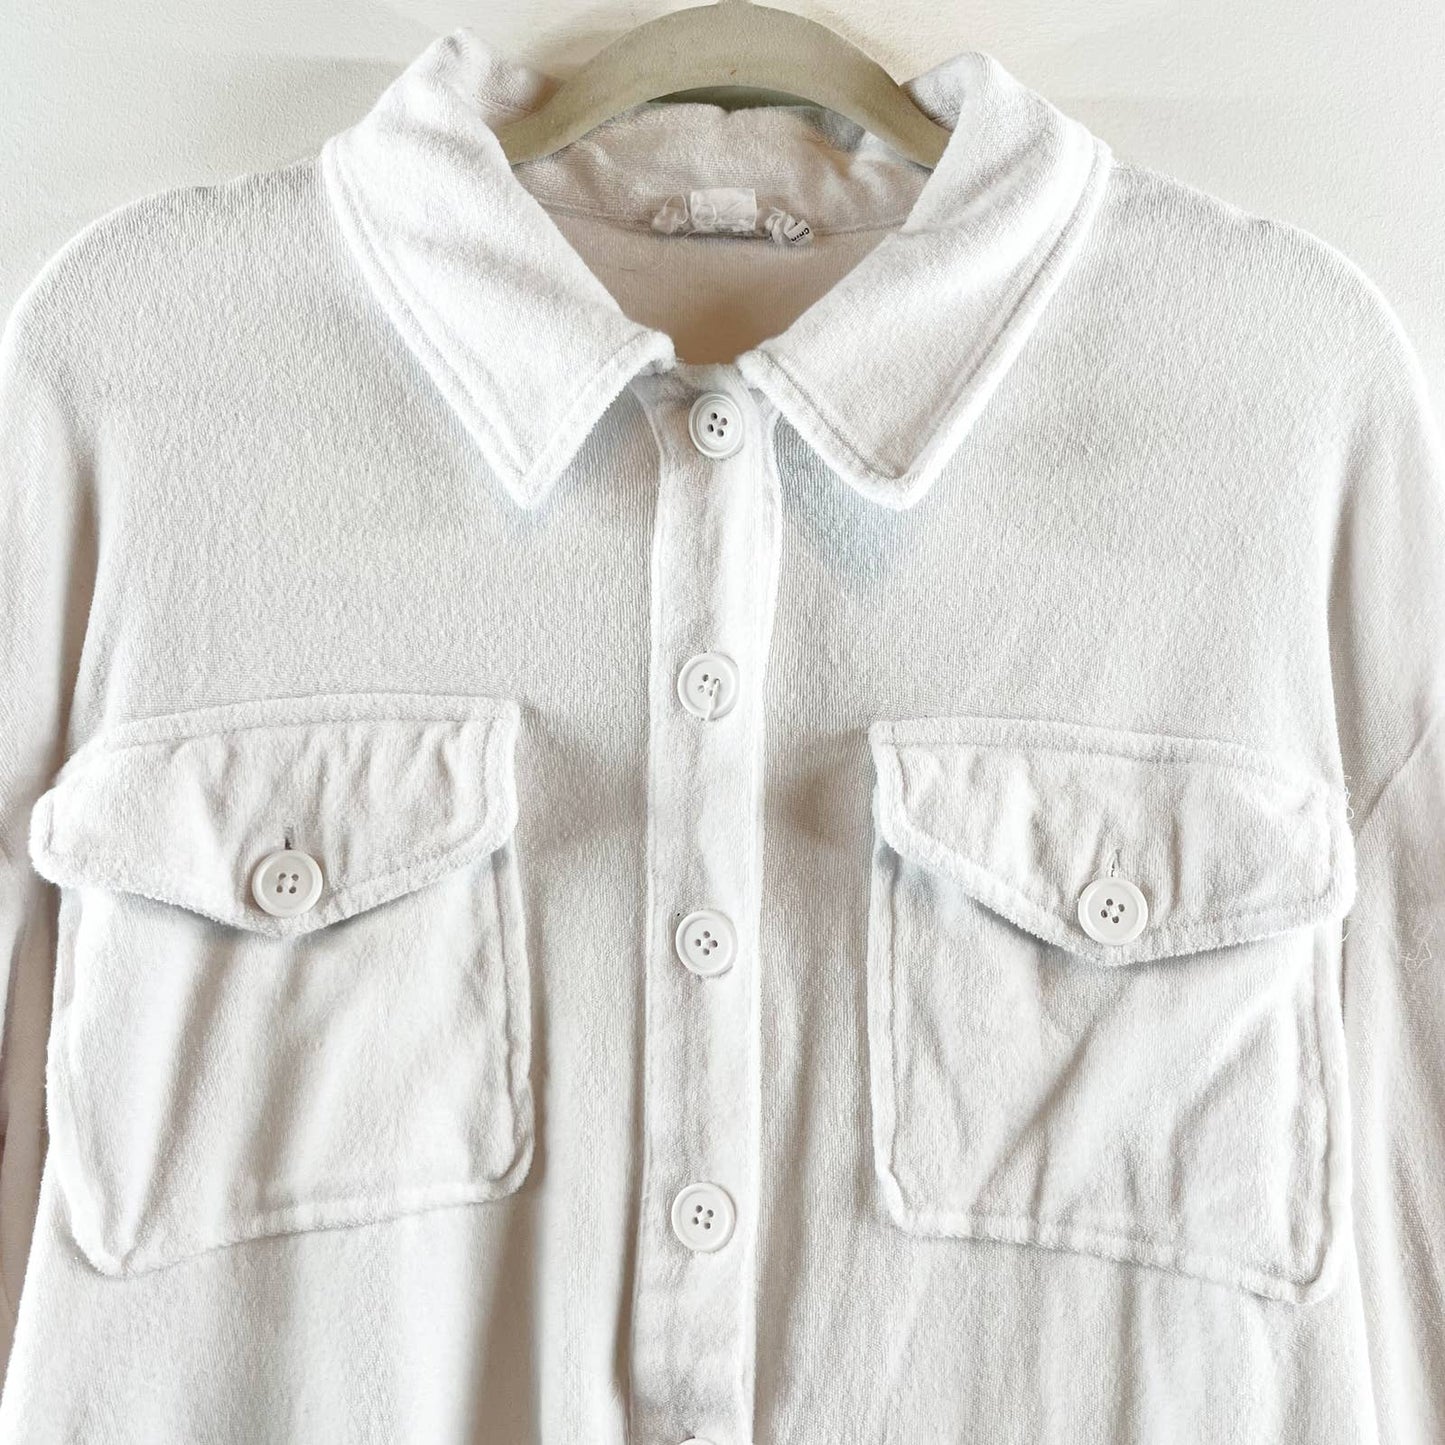 Good American Cotton Terry Long Sleeve Button Front Cover Up Shirt Jacket White